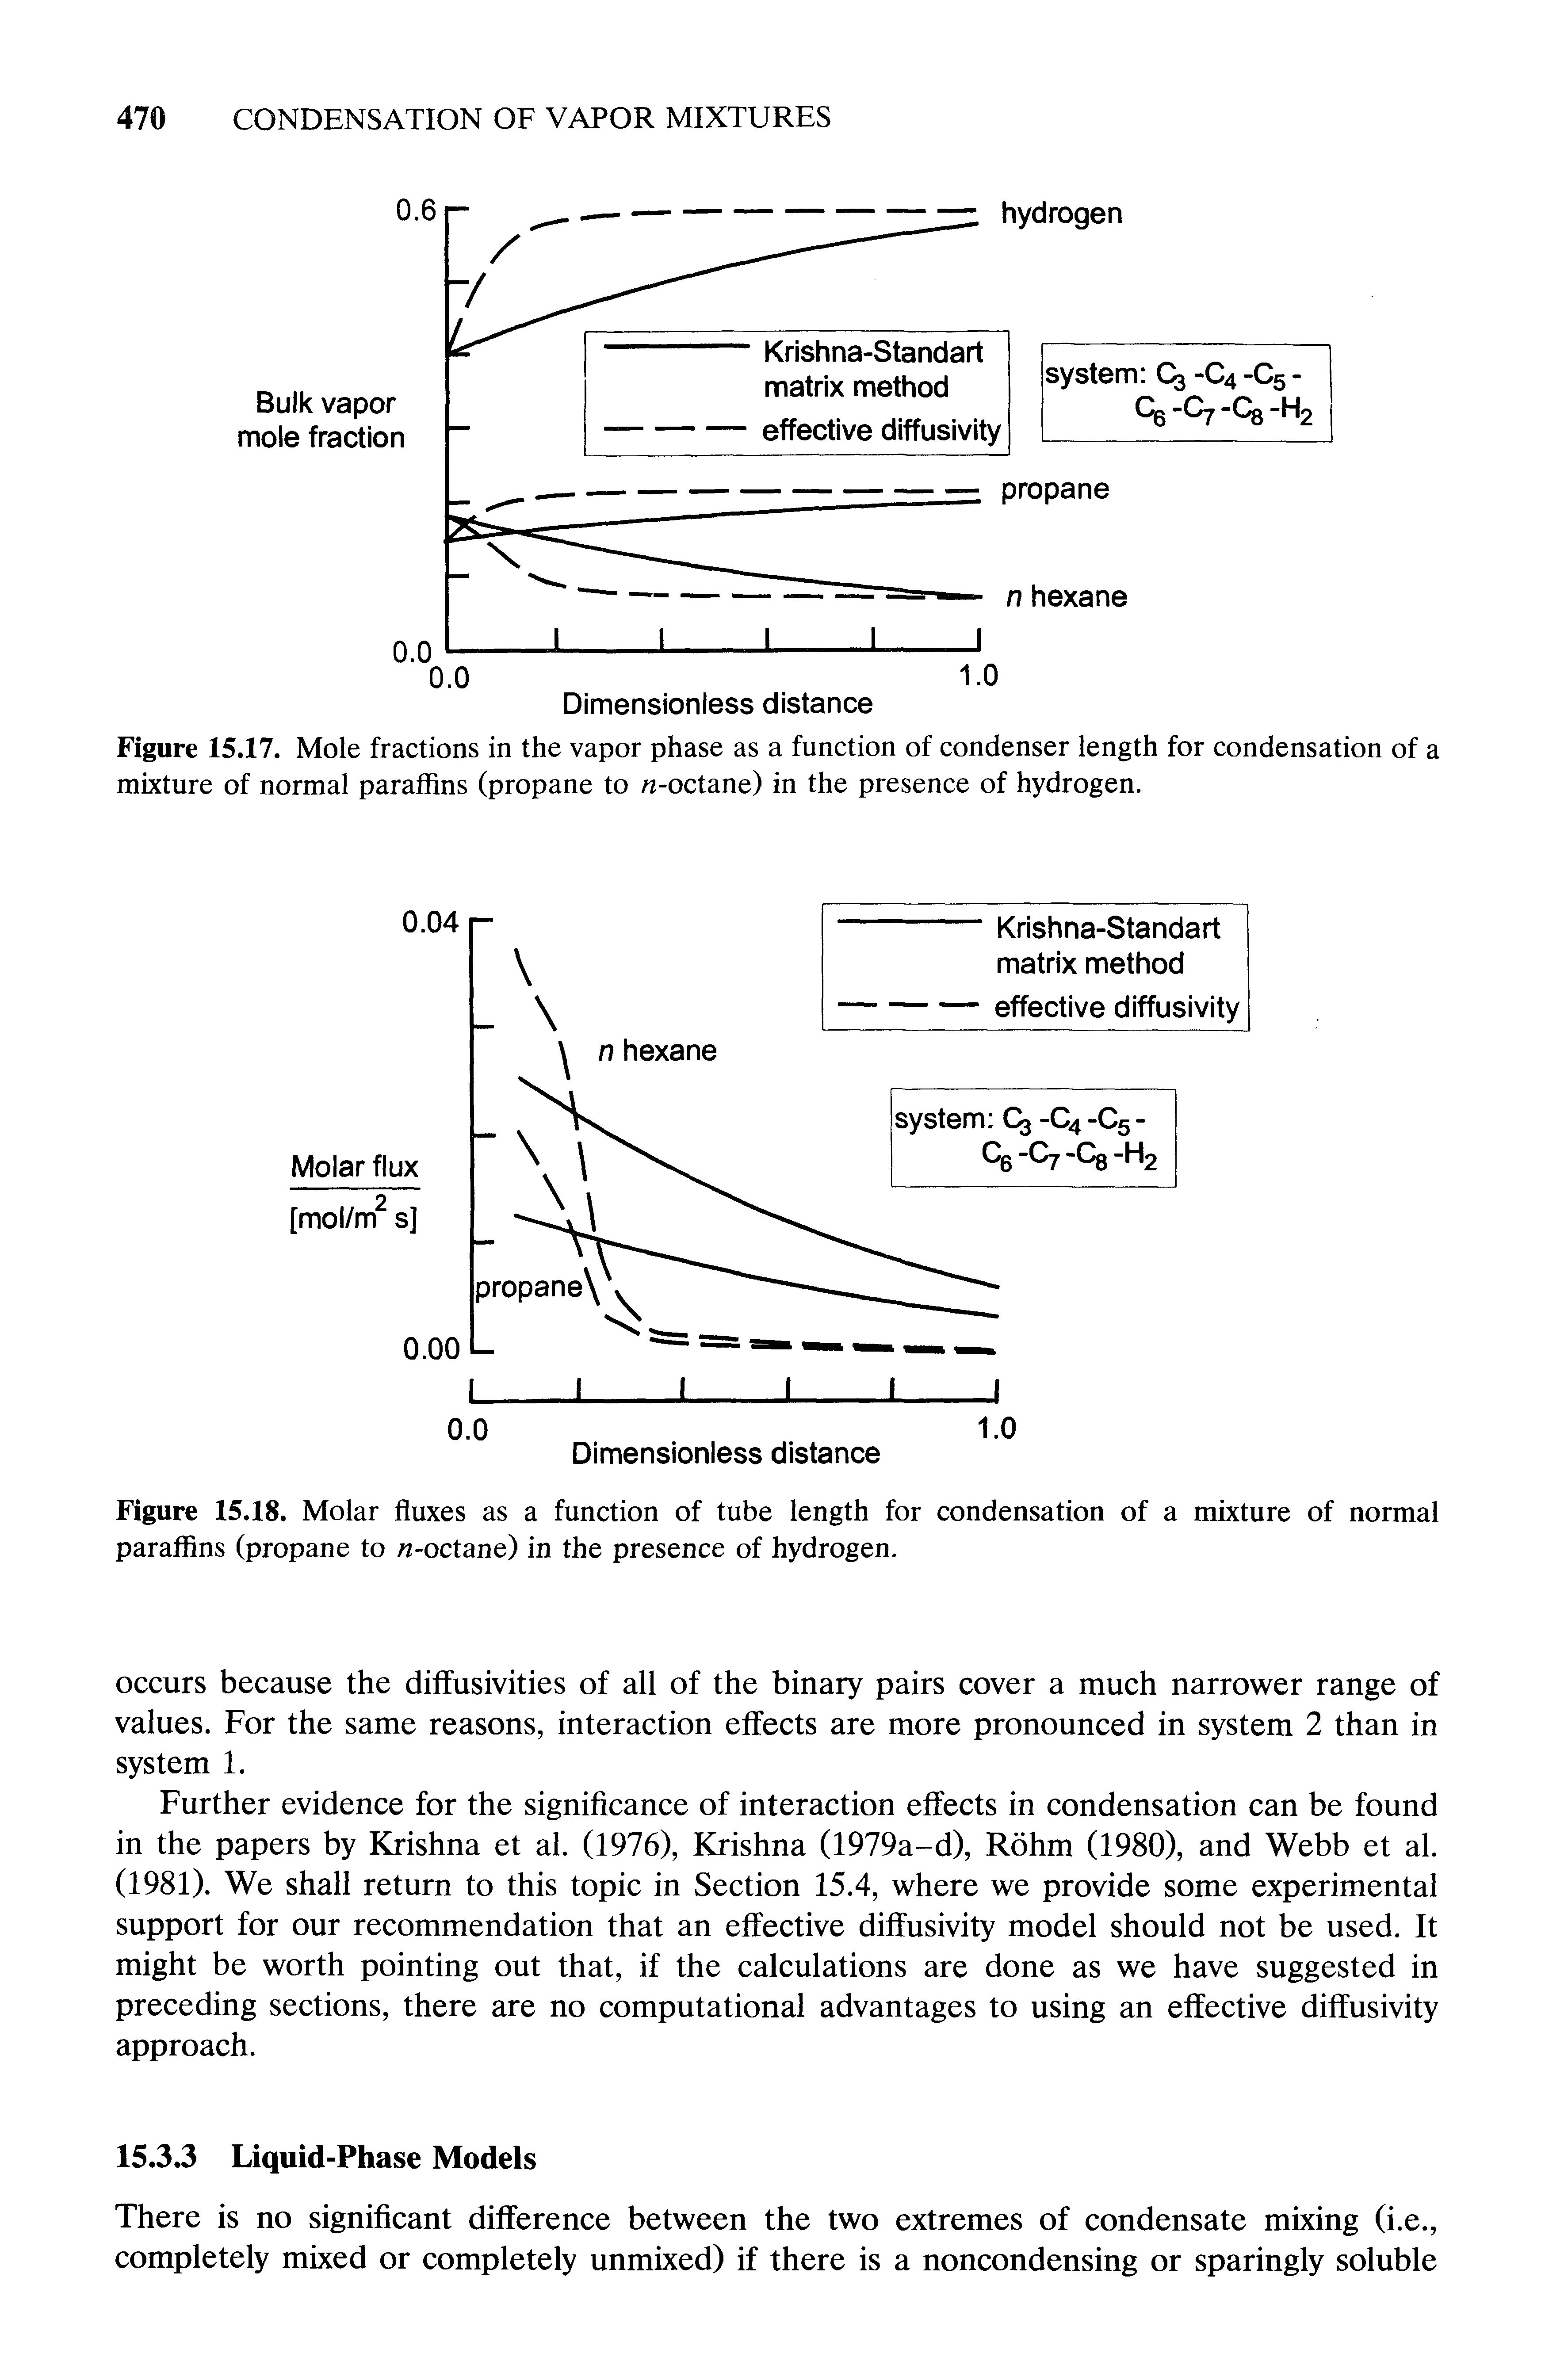 Figure 15.17. Mole fractions in the vapor phase as a function of condenser length for condensation of a mixture of normal paraffins (propane to /i-octane) in the presence of hydrogen.